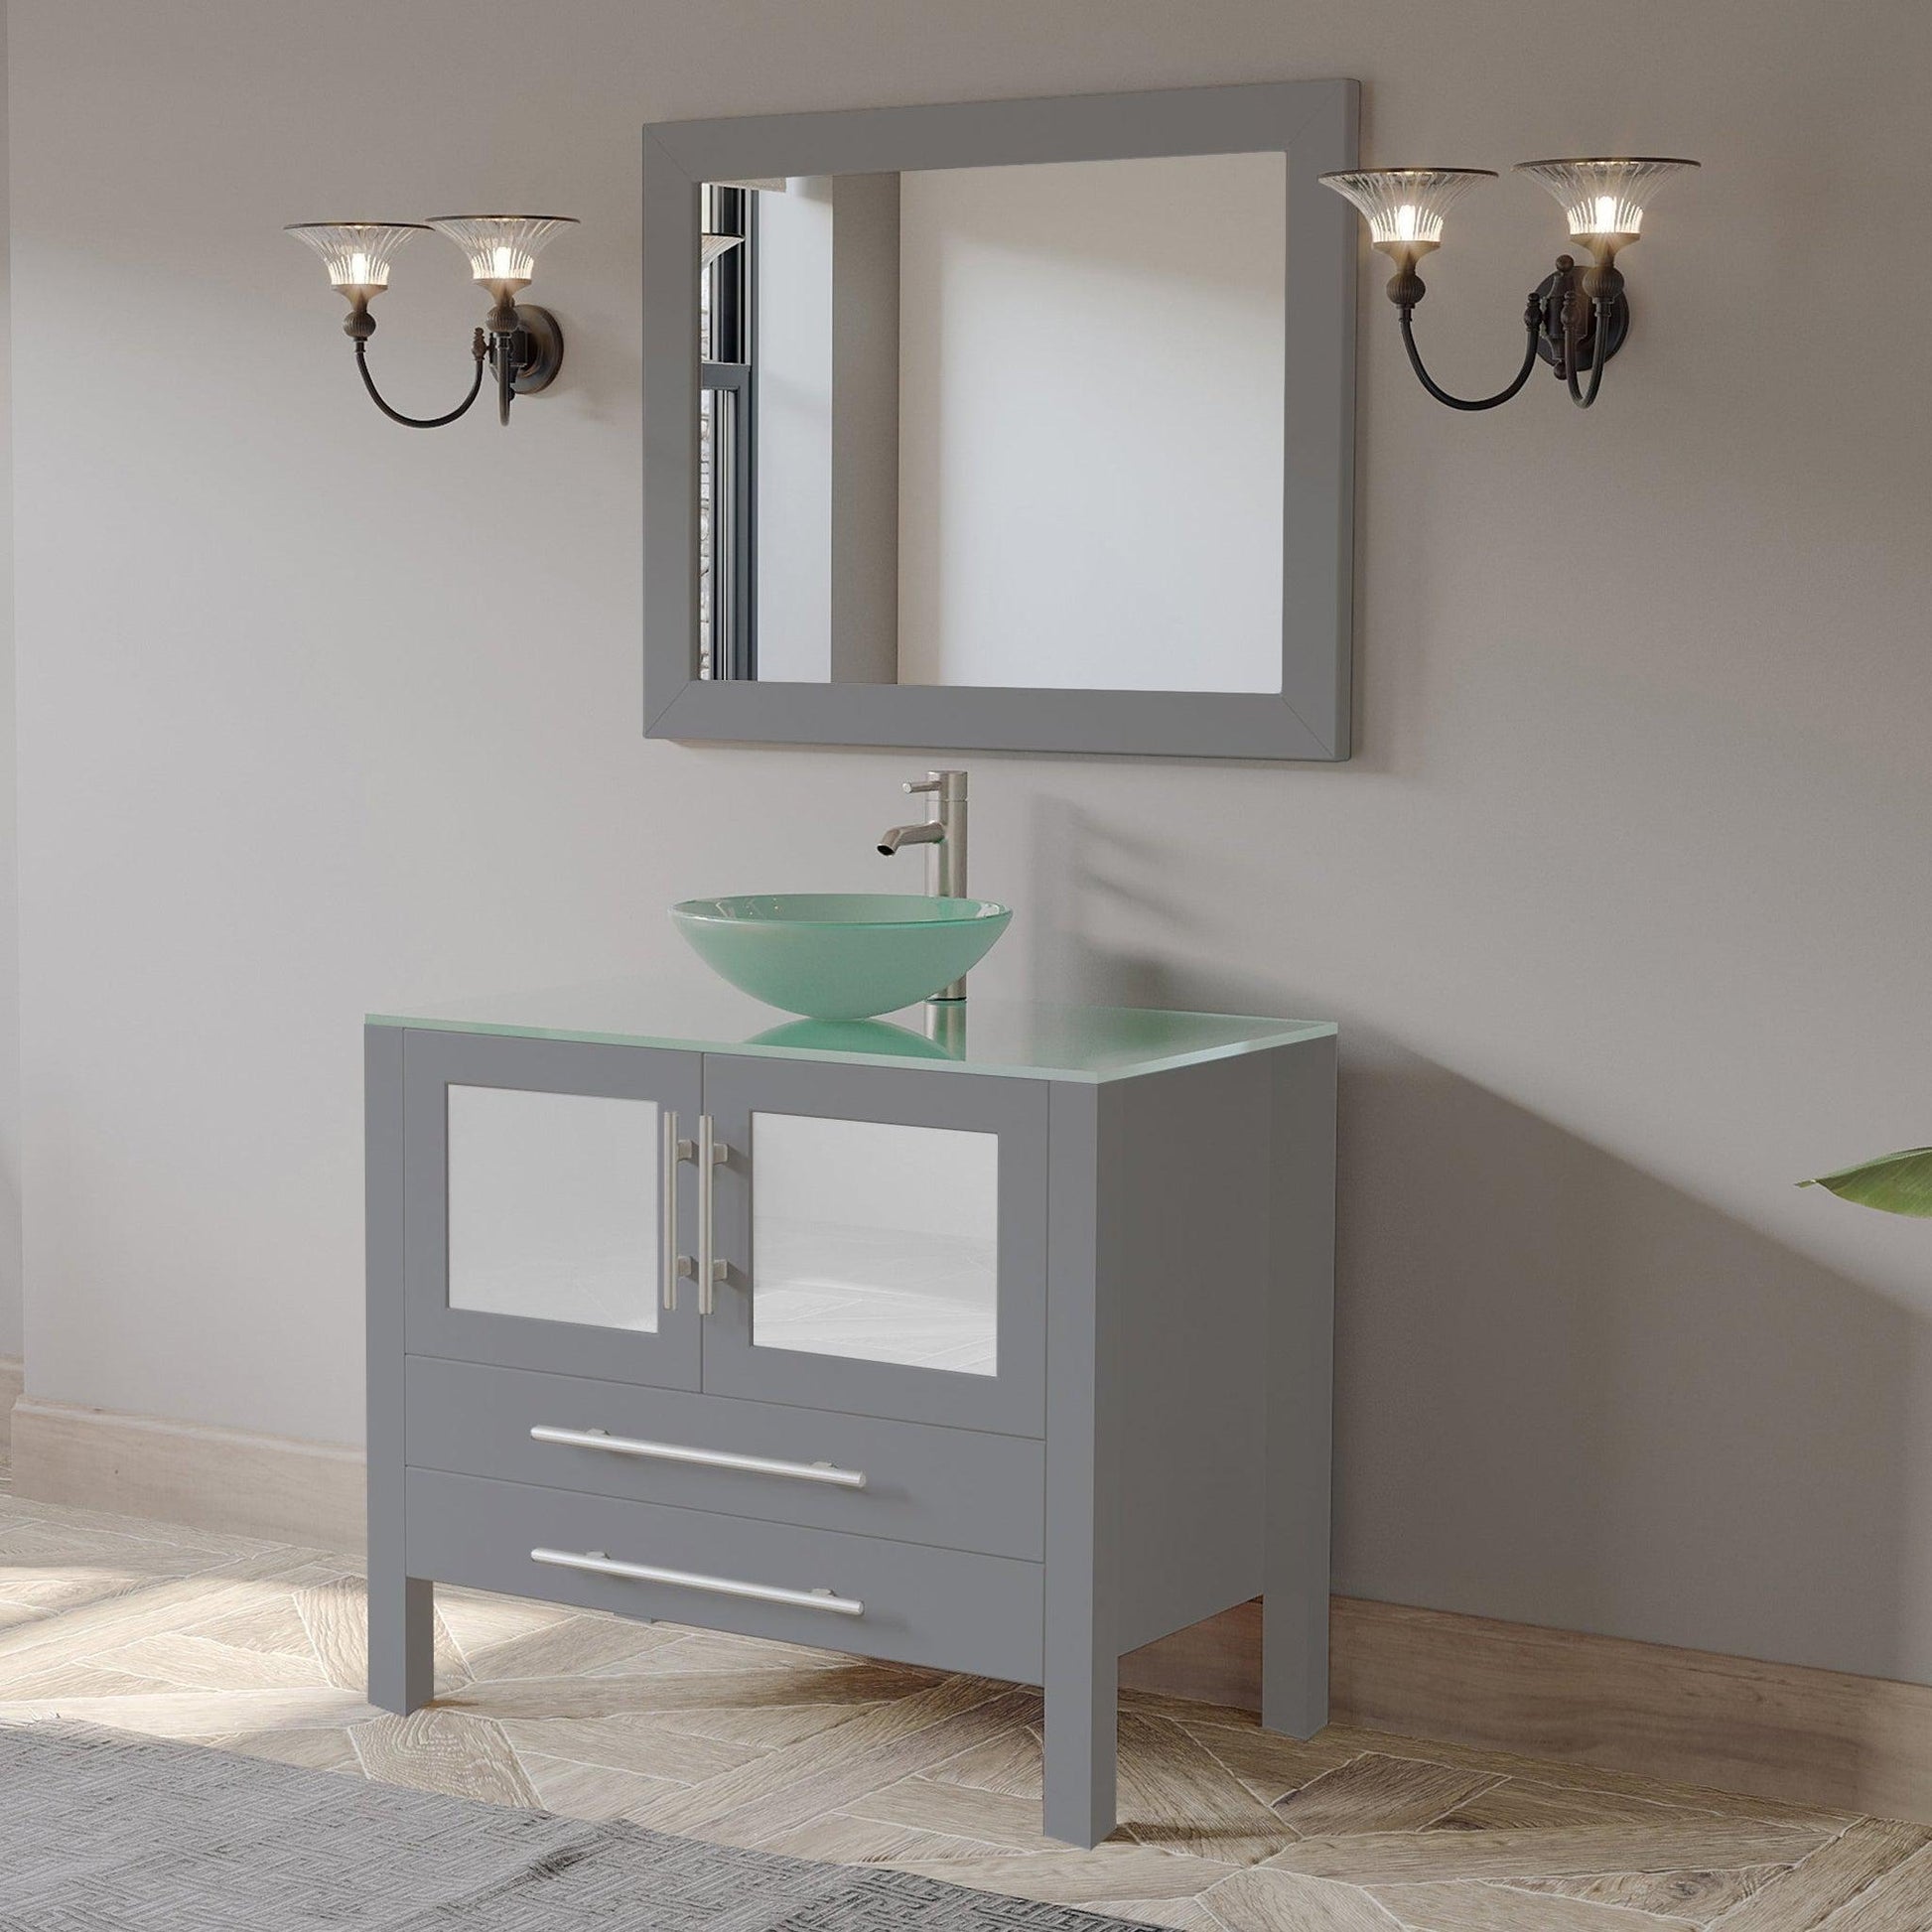 Cambridge Plumbing 36" Gray Wood Single Vanity Set With Tempered Glass Countertop And Circular Vessel Sink With Brushed Nickel Plumbing Finish